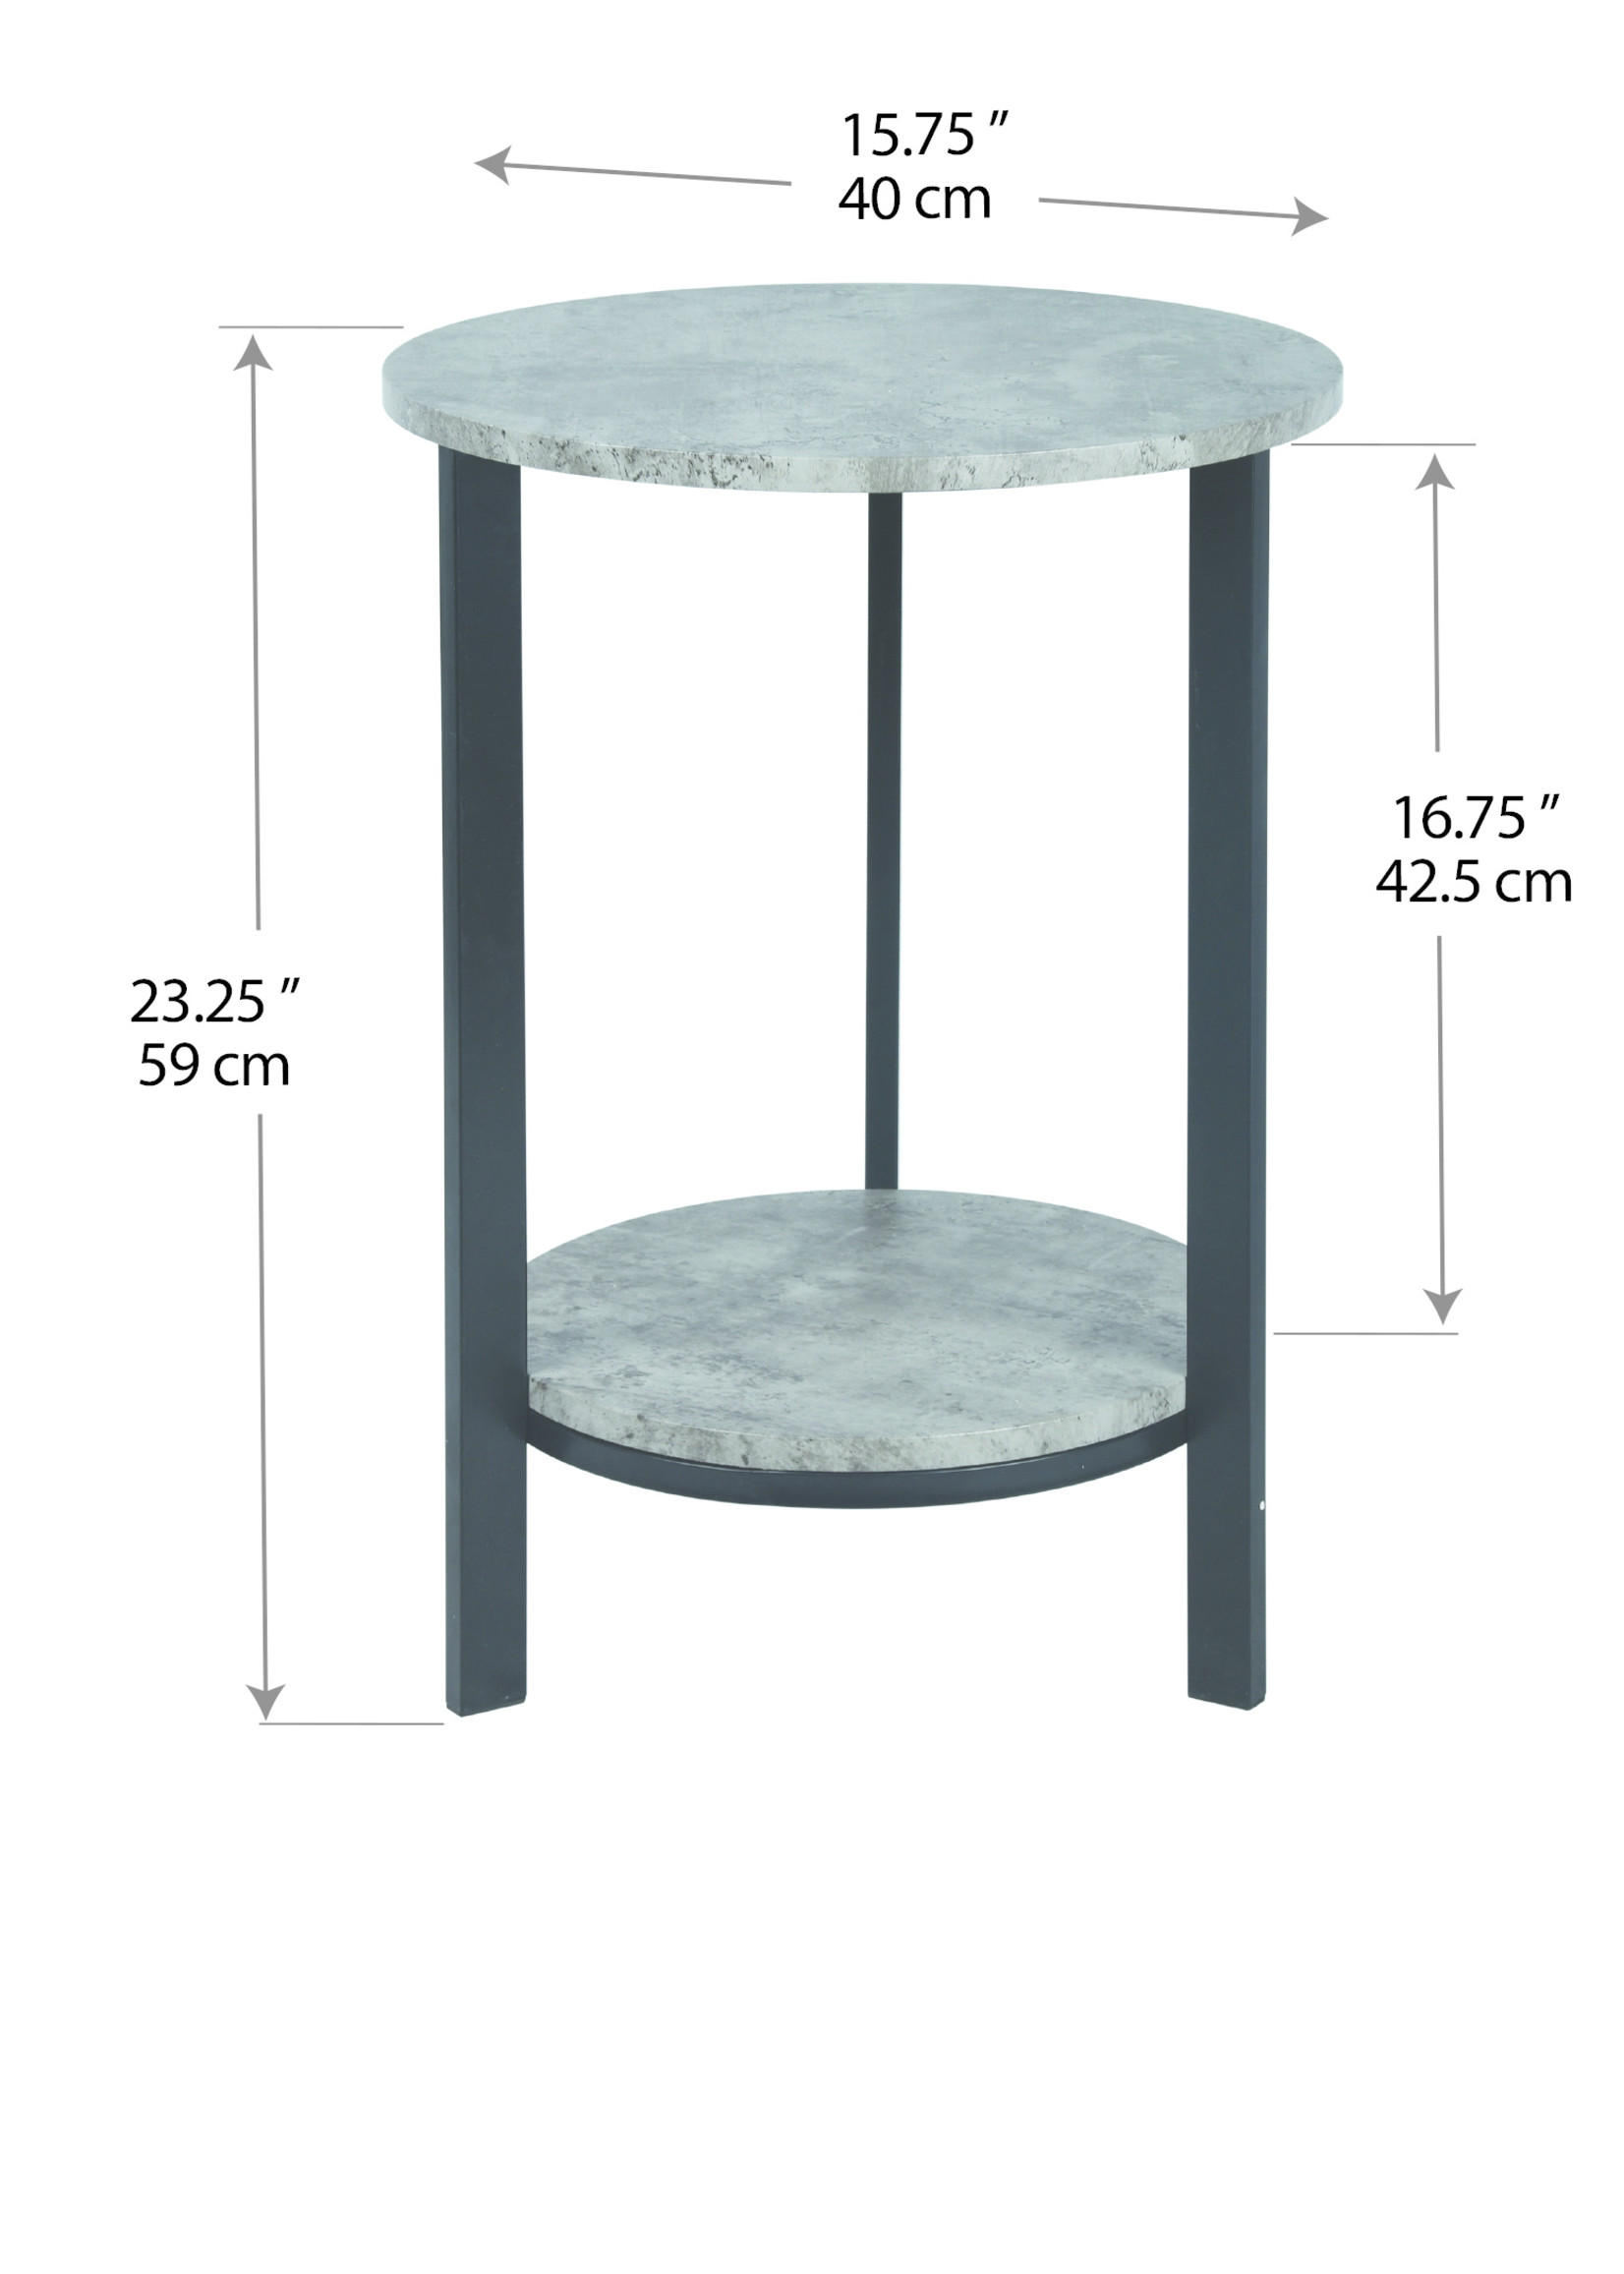 ITY INTERNATIONAL ROUND ACCENT TABLE 2-TIER  24H